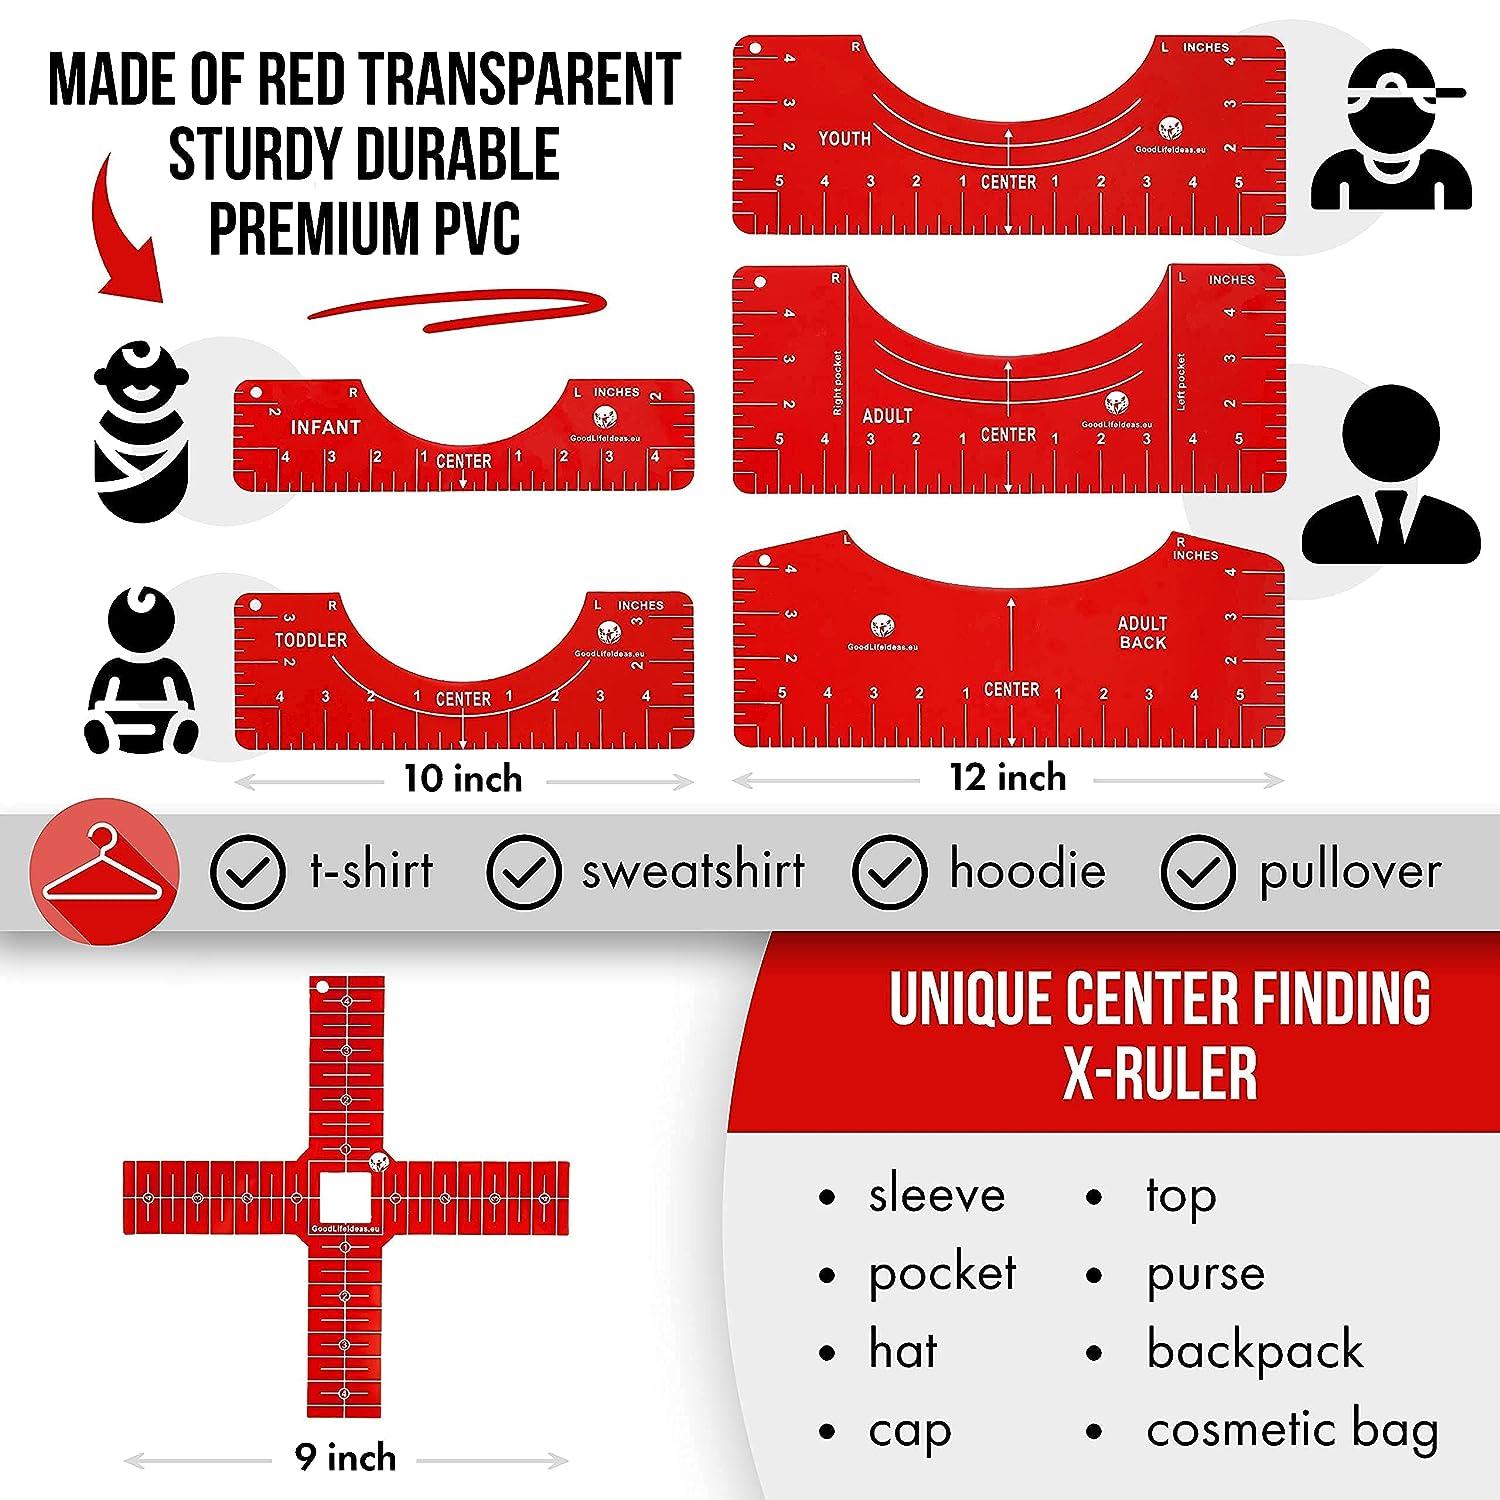 Good Life Ideas Tshirt Ruler Guide for Vinyl Alignment - T-Shirt  Measurement Tool Heat Press to Center Designs, Easy tee Centering Tool, t  Shirt aligning kit 7pcs, Red, Gray, White, Black, 12